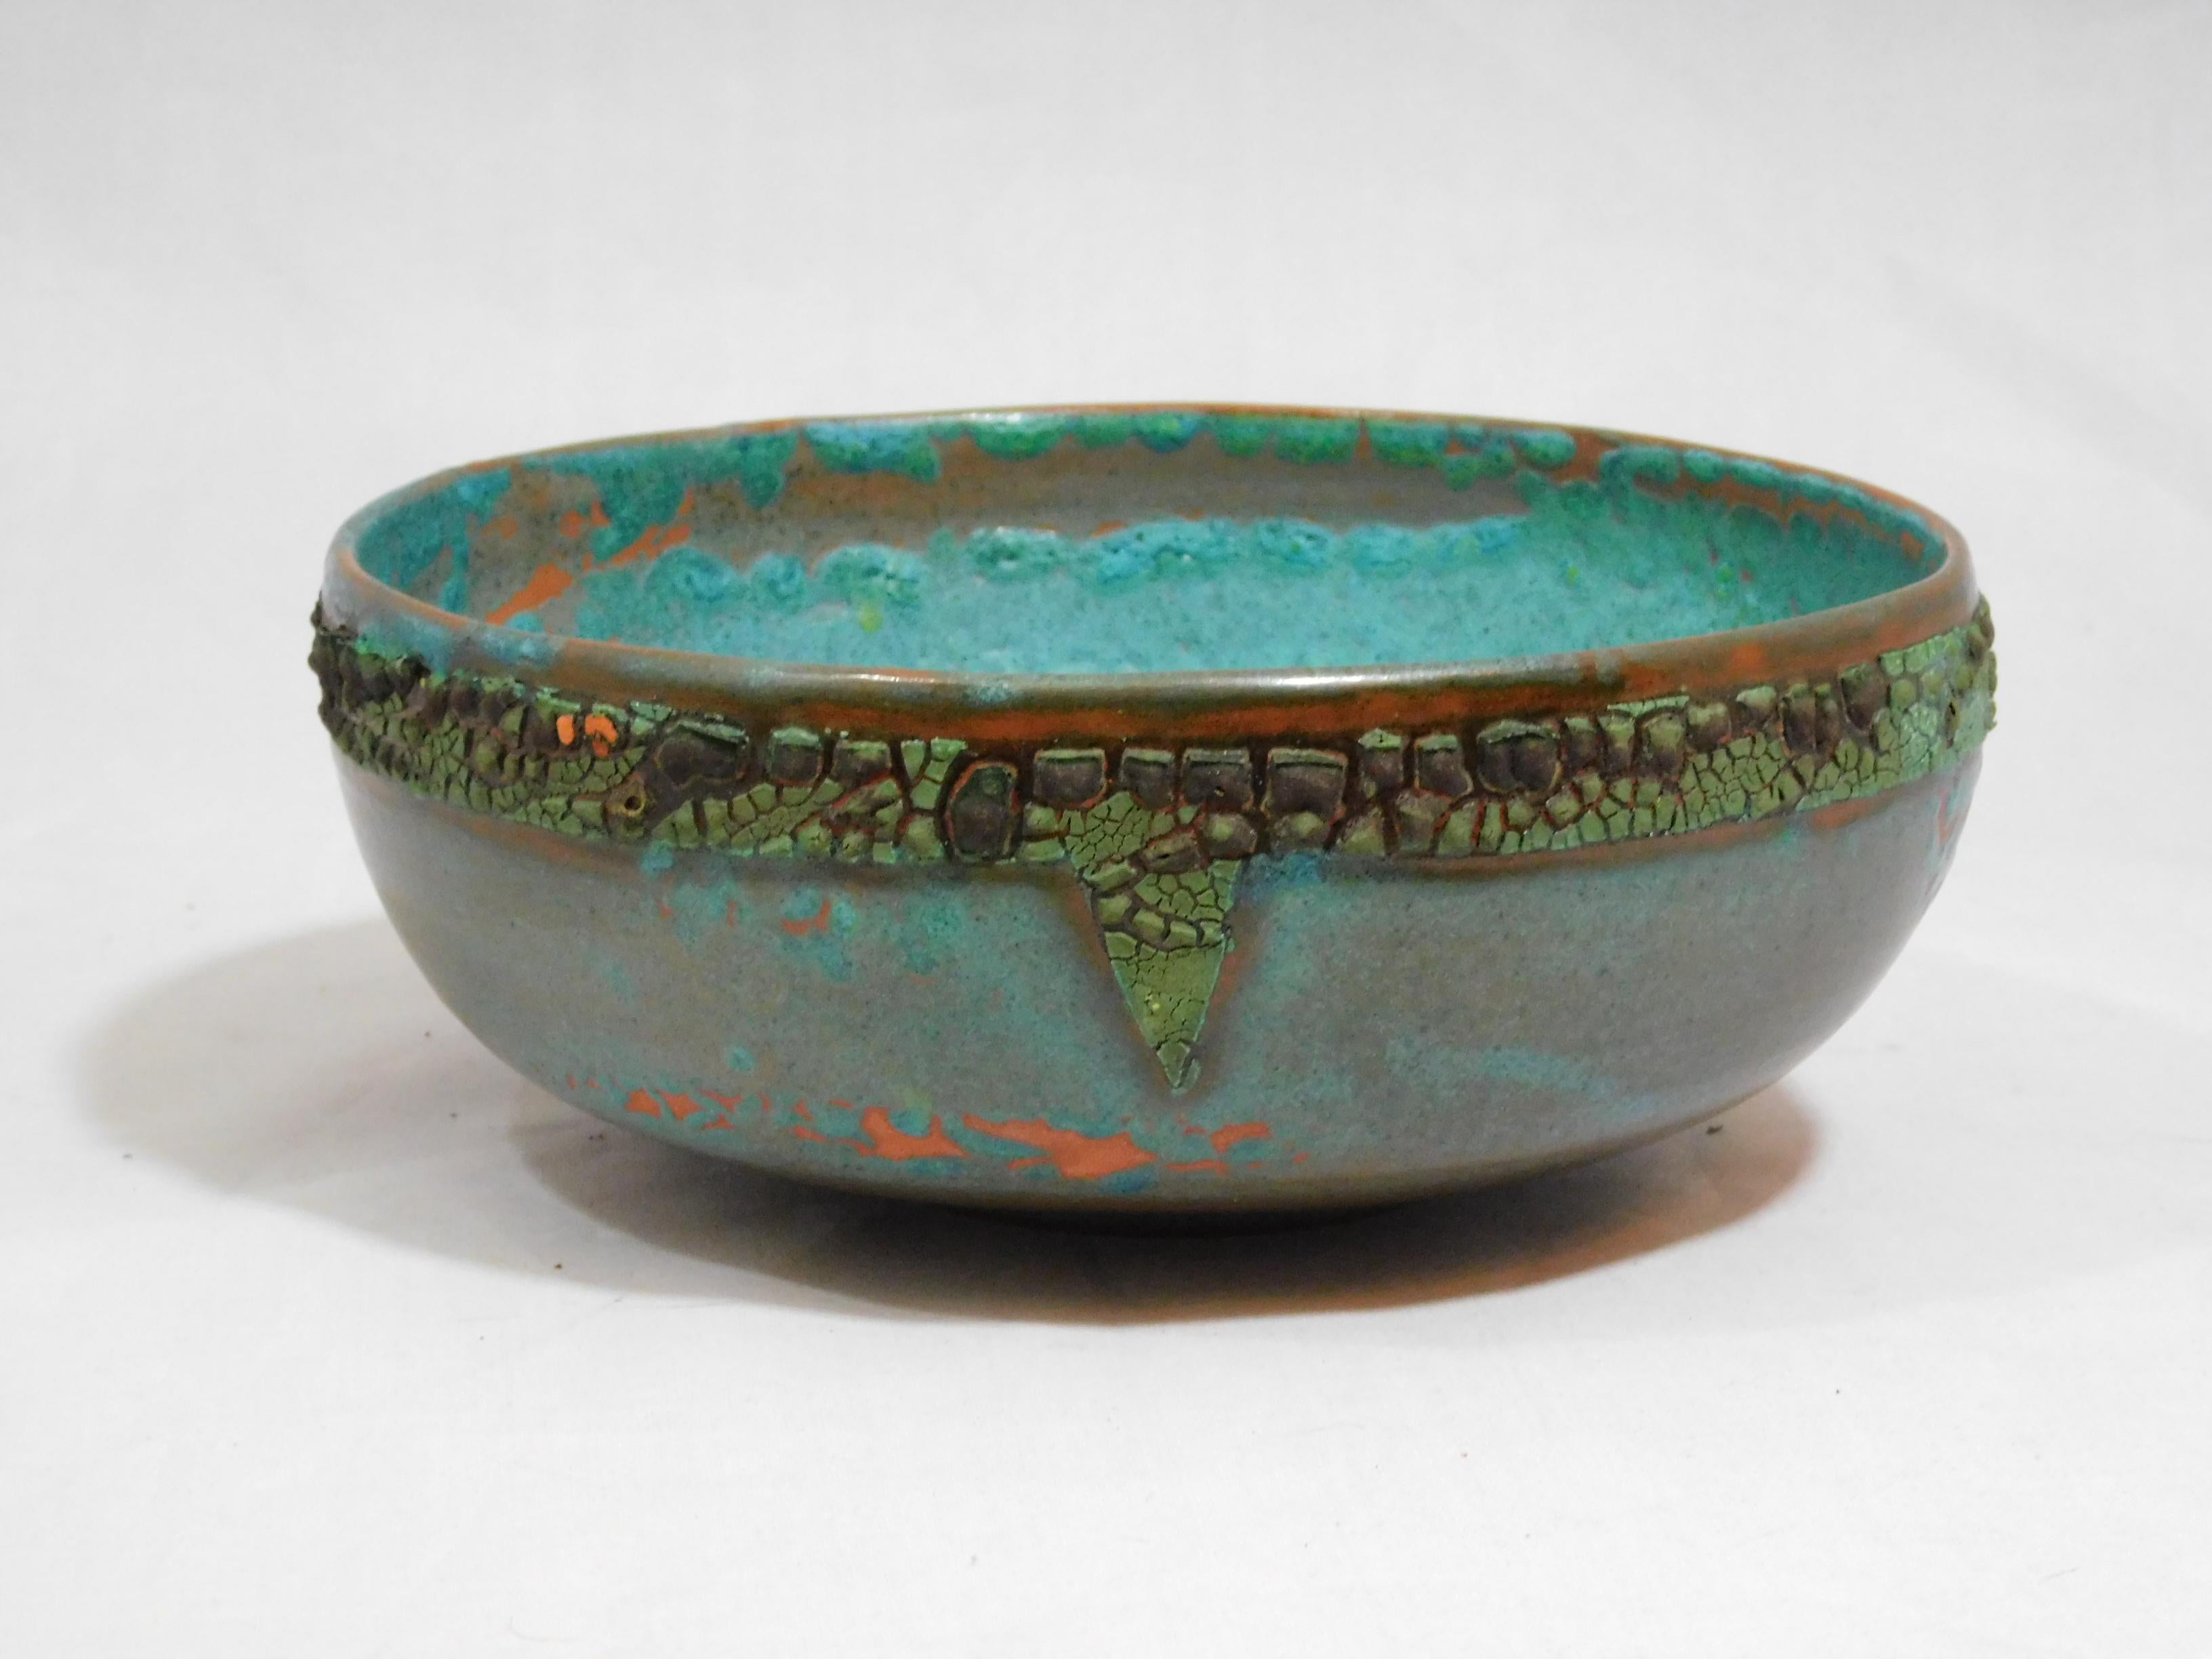 Wheel thrown Los Feliz earthenware bowl by ceramicist Andrew Wilder. This is a one of a kind object made in the ancient way- by hand in a small artisanal pottery. In this series Wilder explores the application of lichen under glazes to achieve